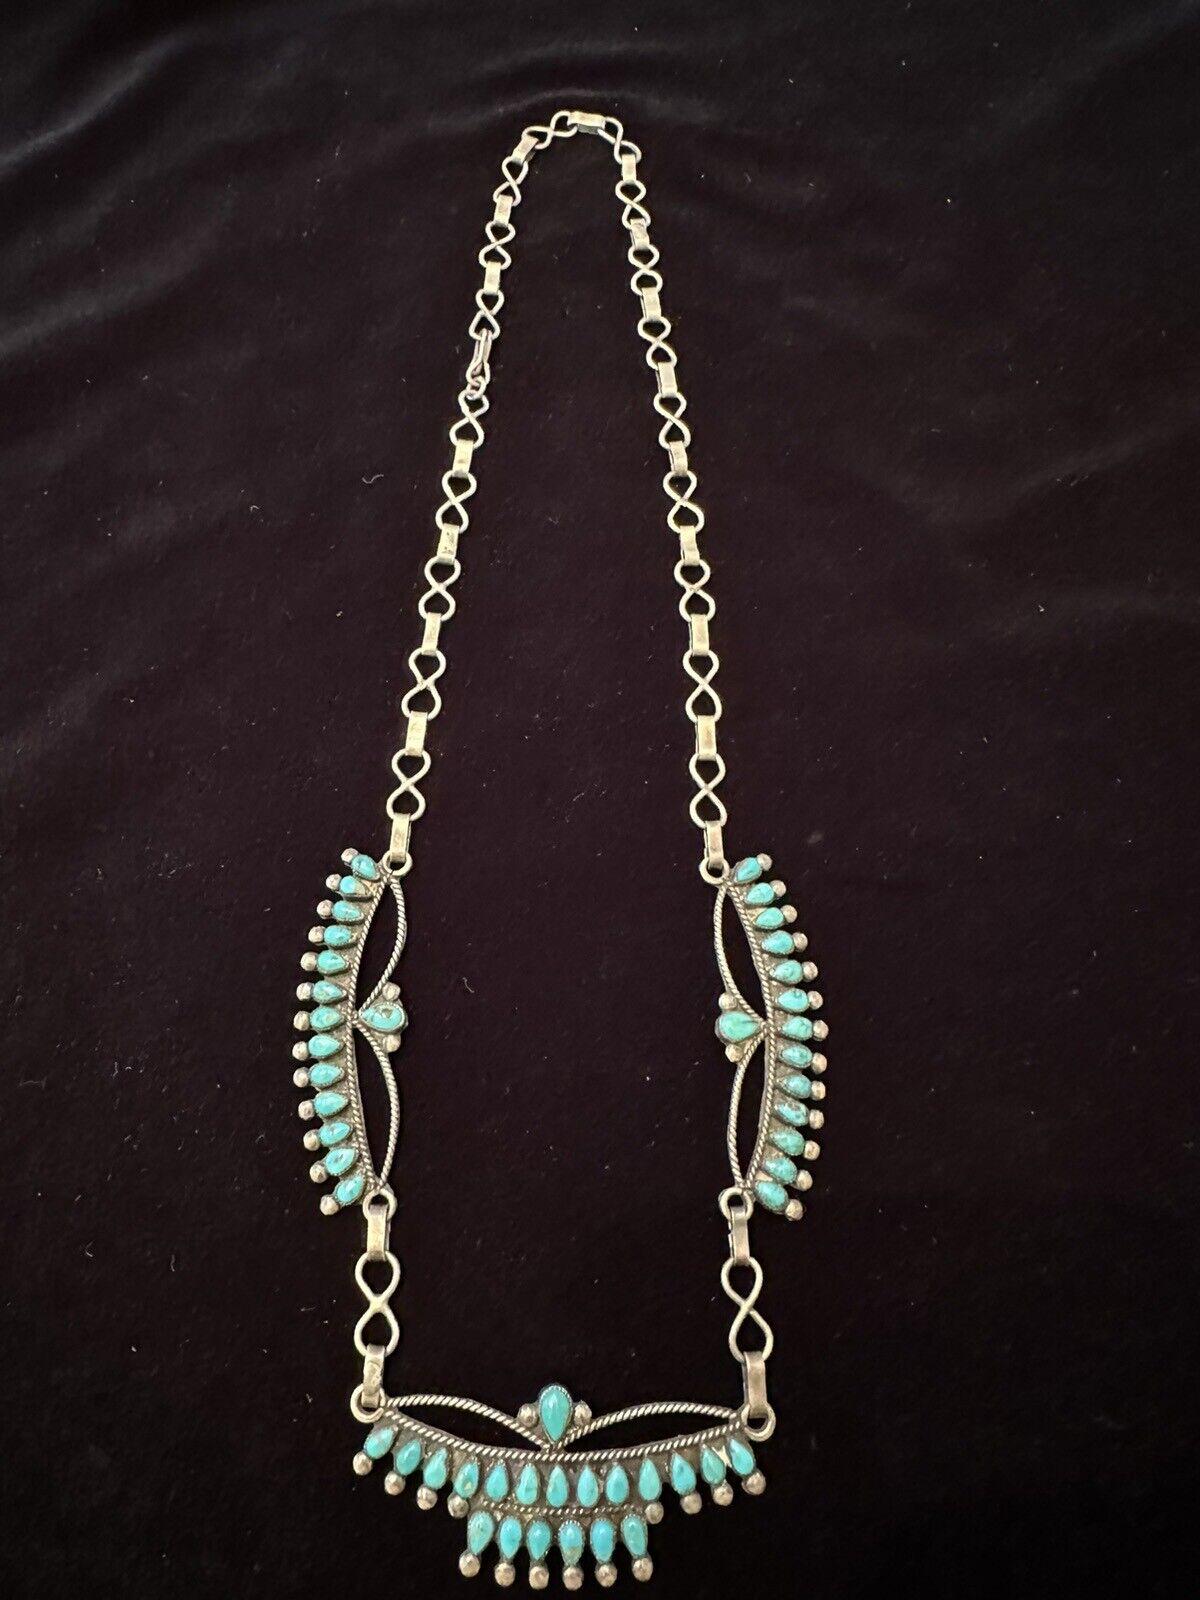 Tout simplement magnifique ! Vintage Old Zuni Southwestern Native American Turquoise and Sterling Silver Squash Blossom Necklace. Environ 23